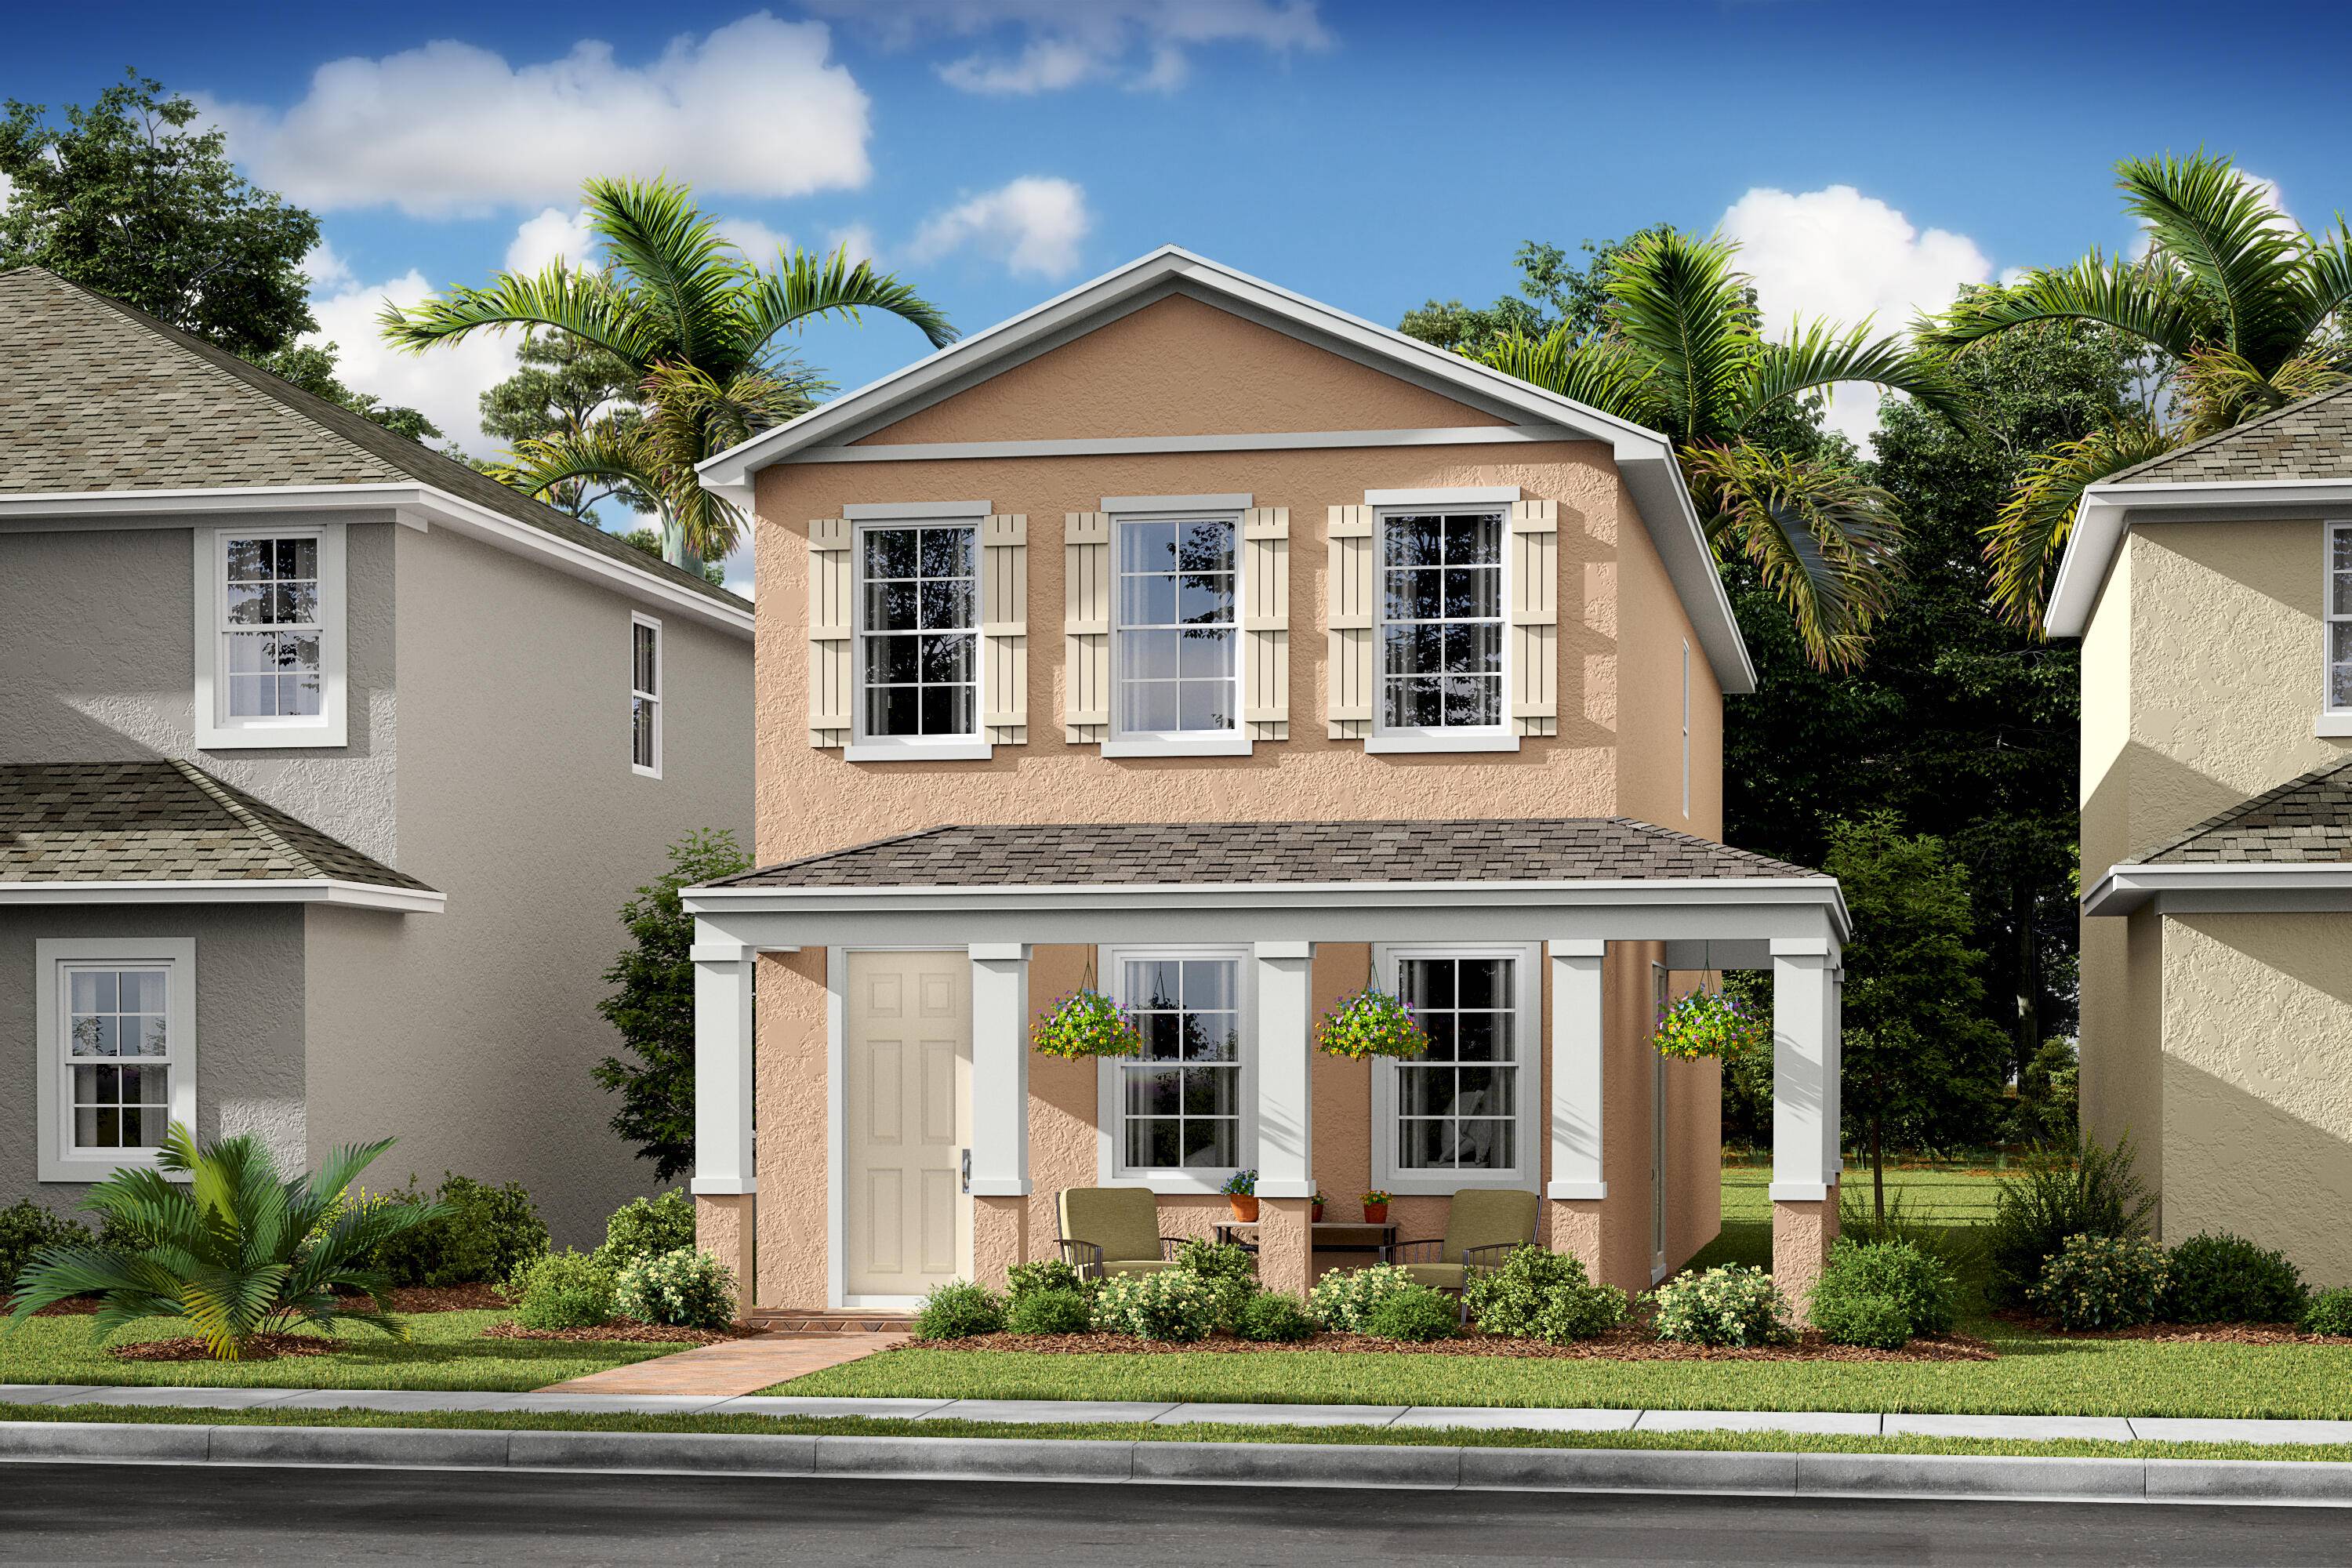 The gorgeous Stetson floorplan has 3 bedrooms, 2 1 2 baths and a 2 car garage.